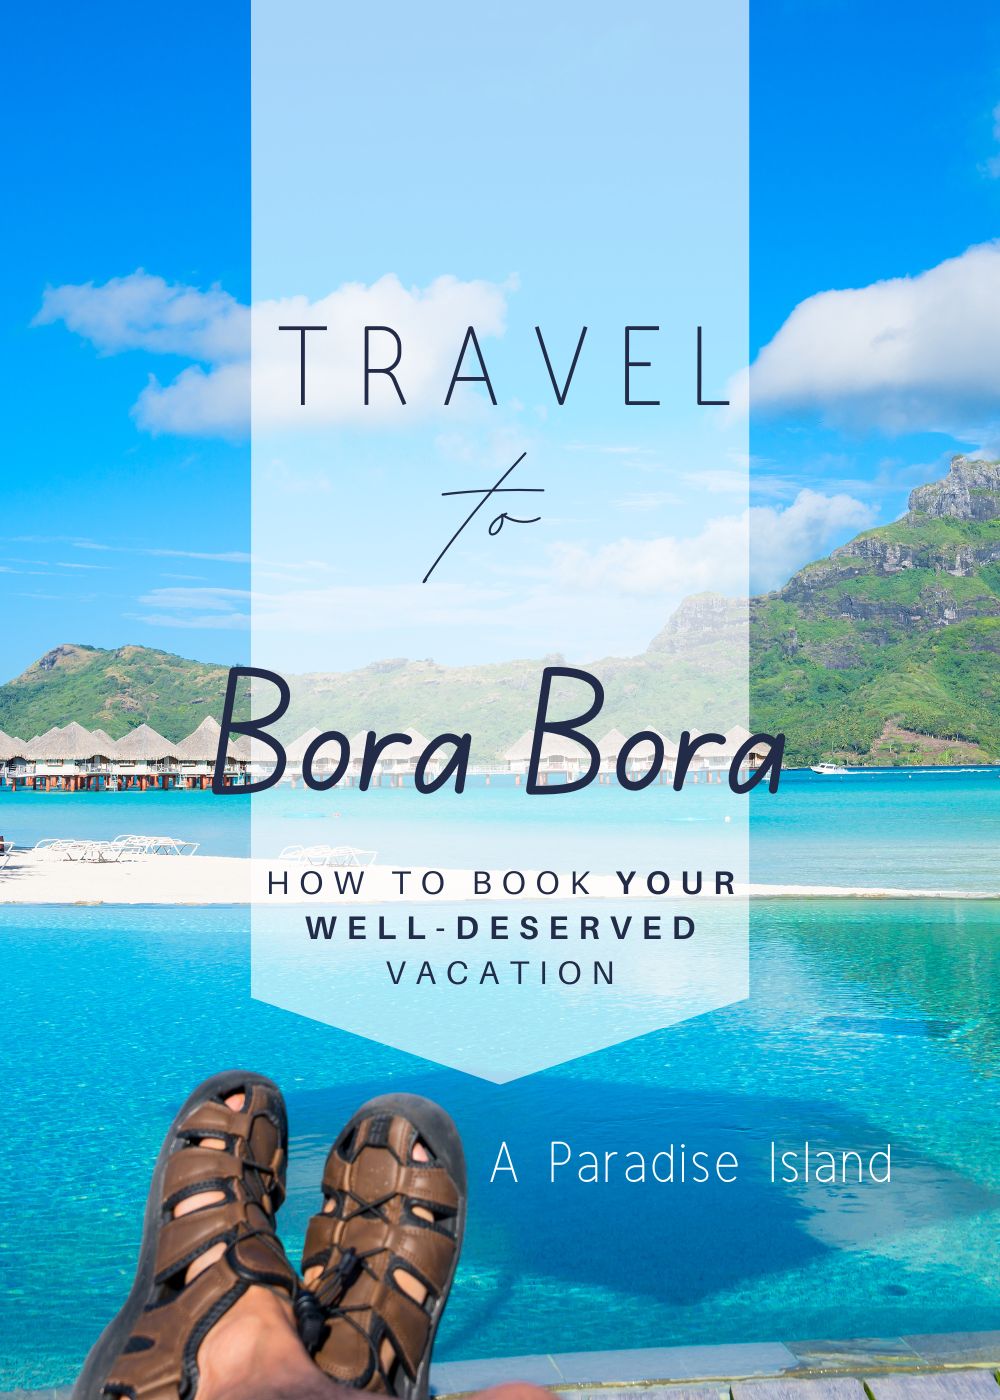 Visit Bora Bora the easy way to book your stay best places to stay award winning things to do book your flights all inclusive